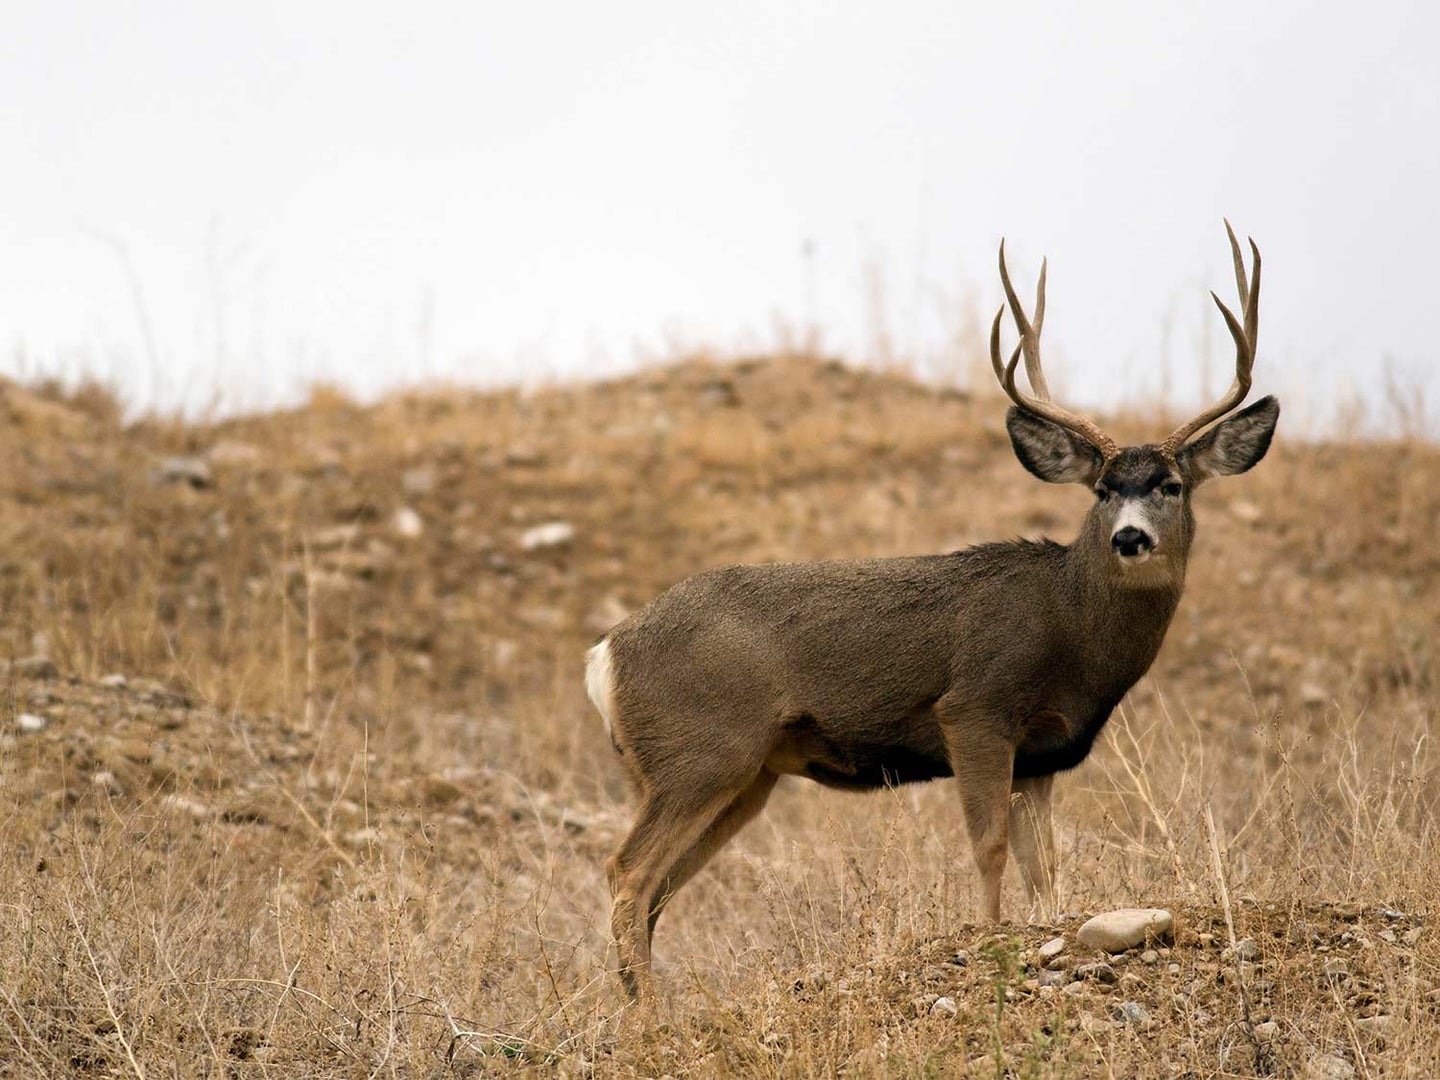 A large whitetail buck stands in an open field.